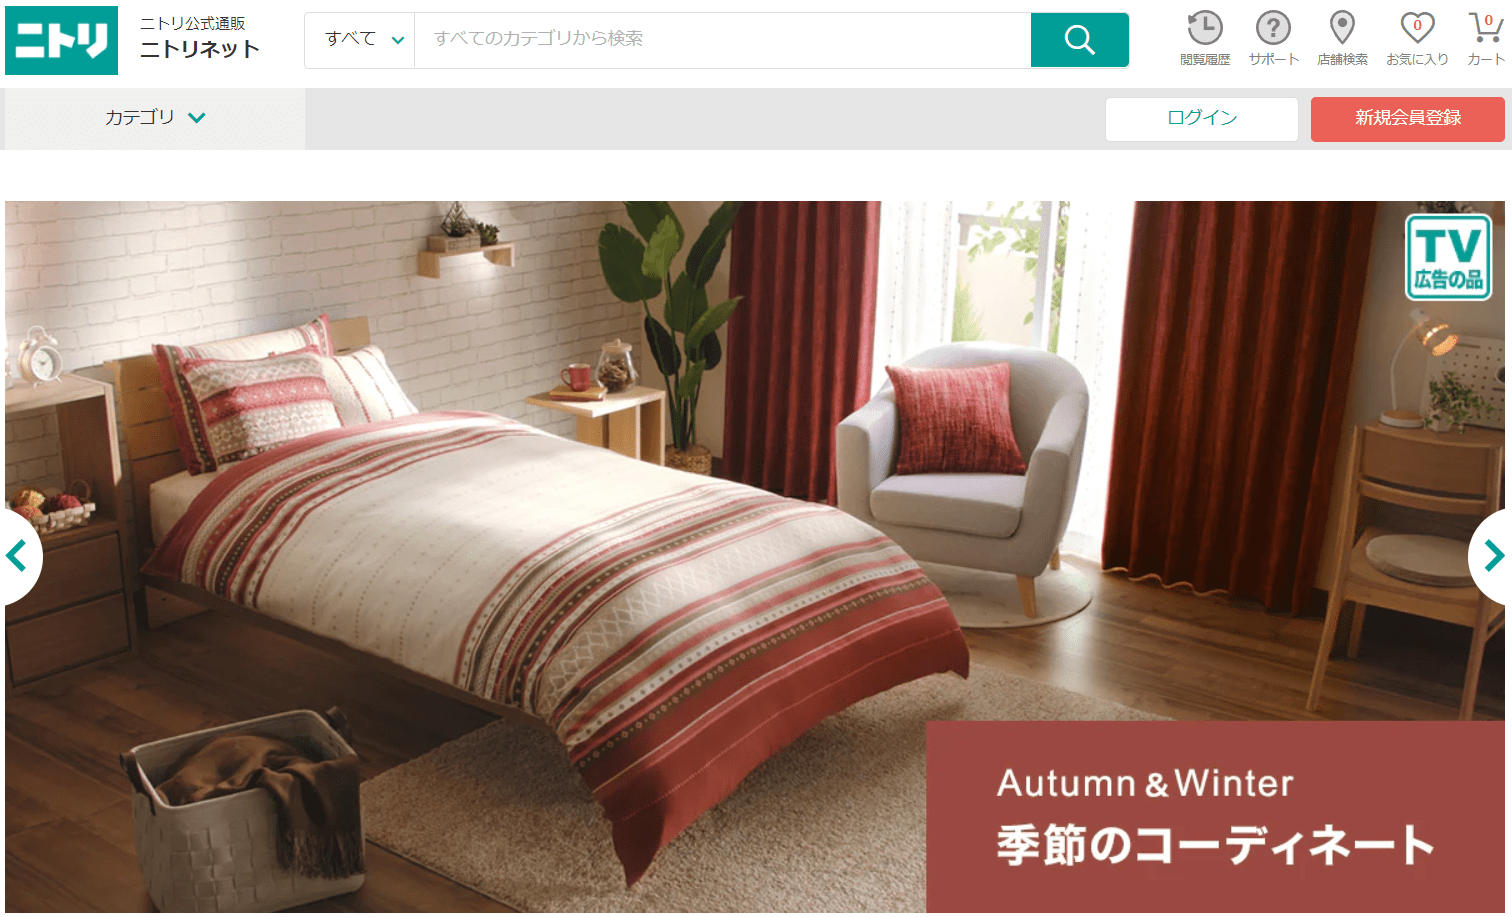 Where to Buy Furniture in Japan for Your Apartment